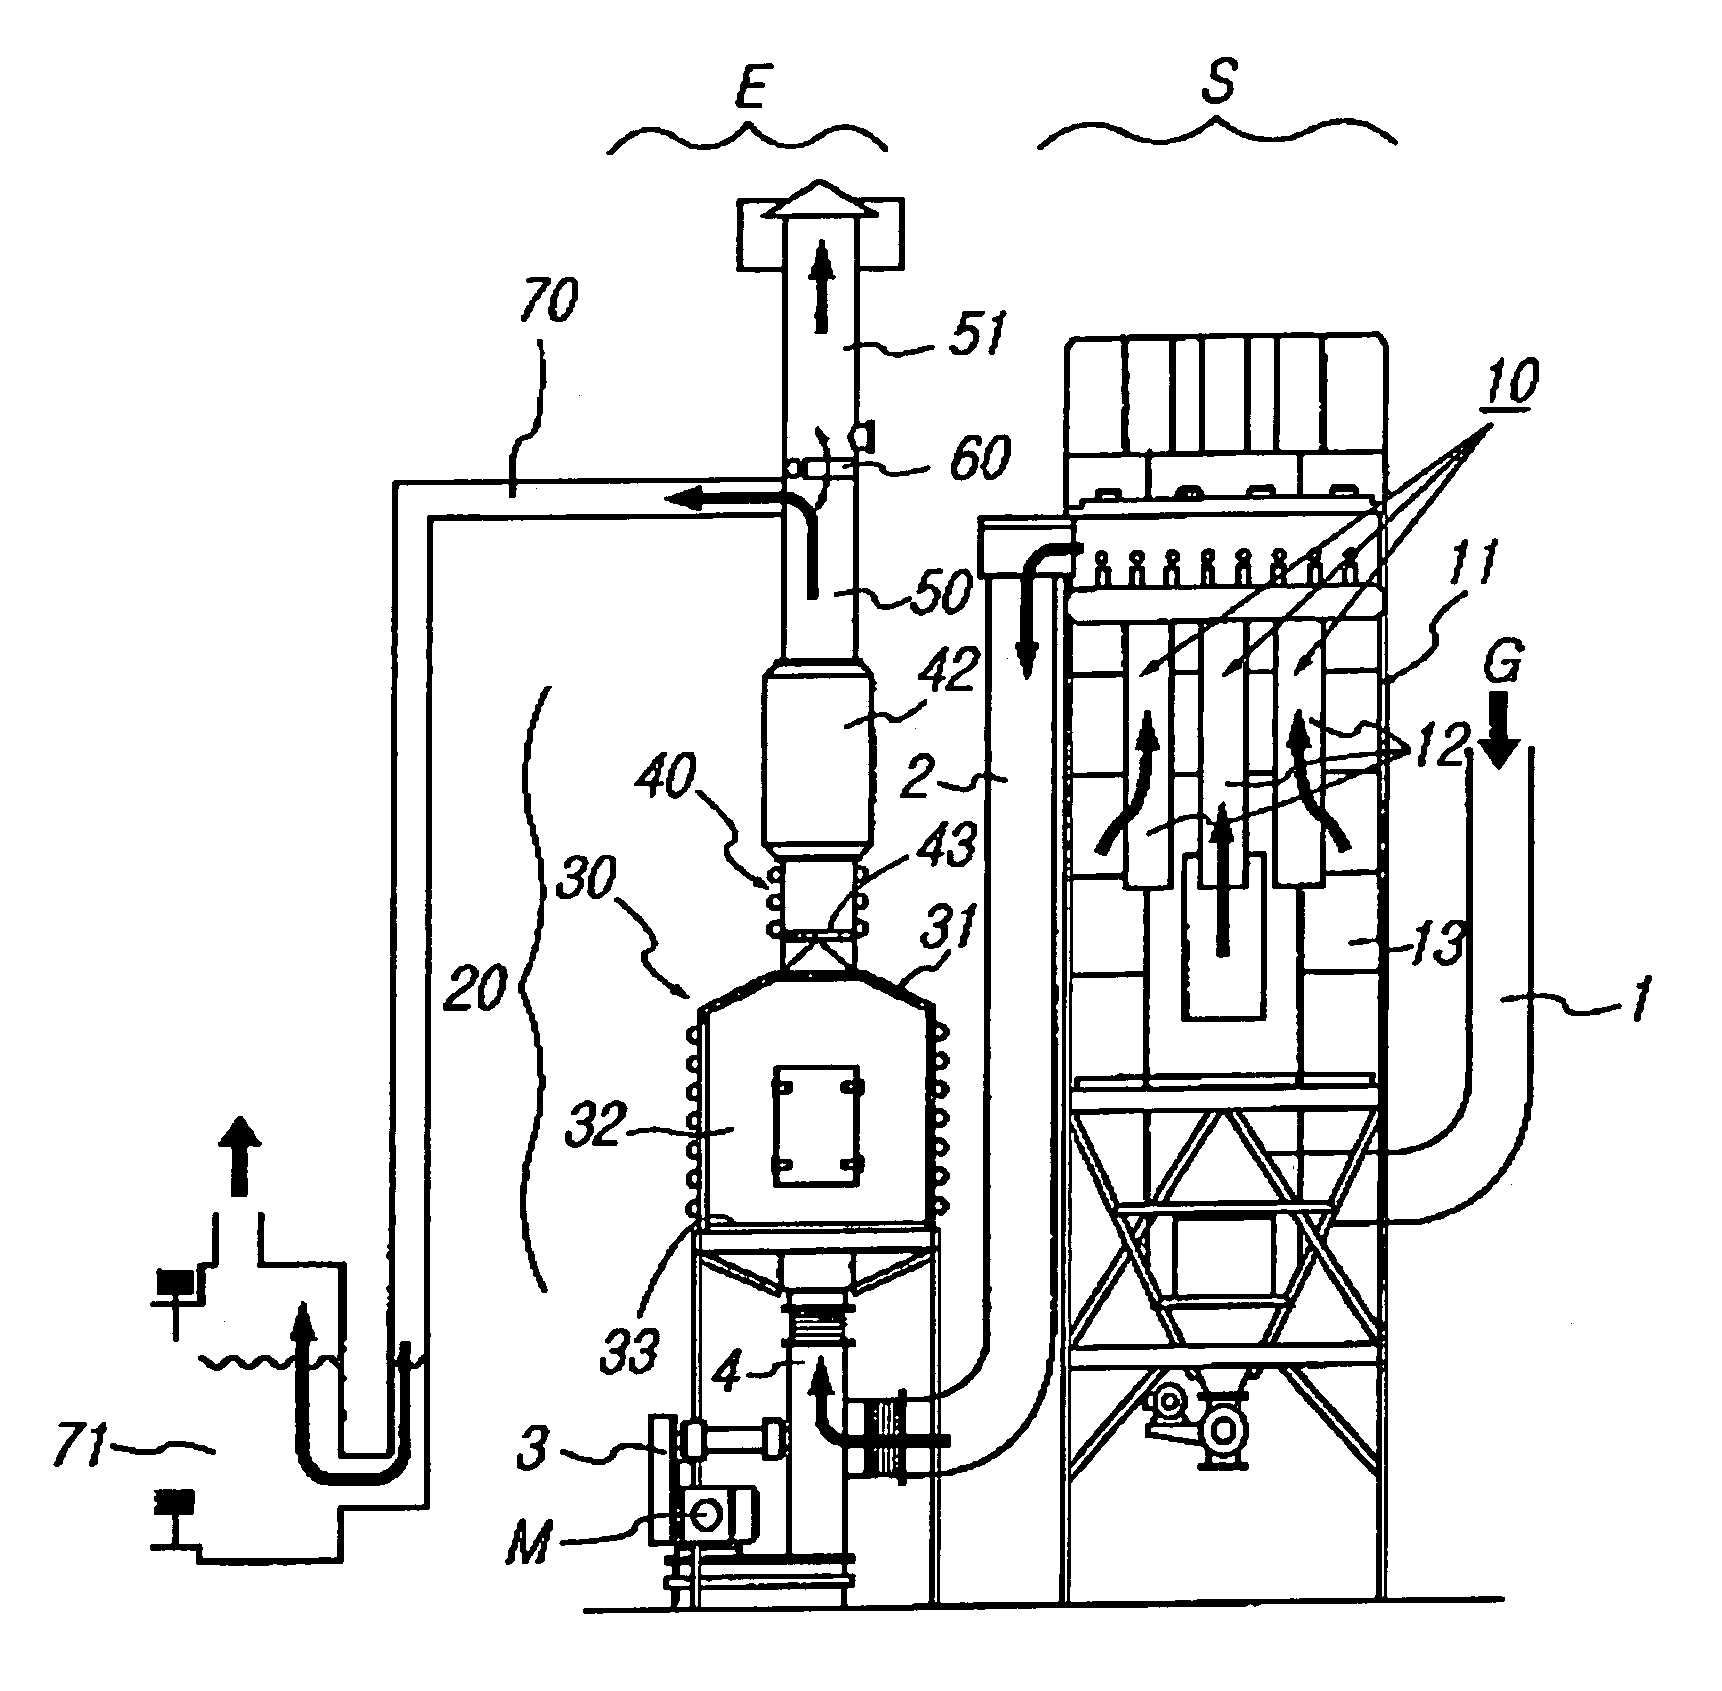 System for simultaneously removing dust and volatile toxic organic compounds